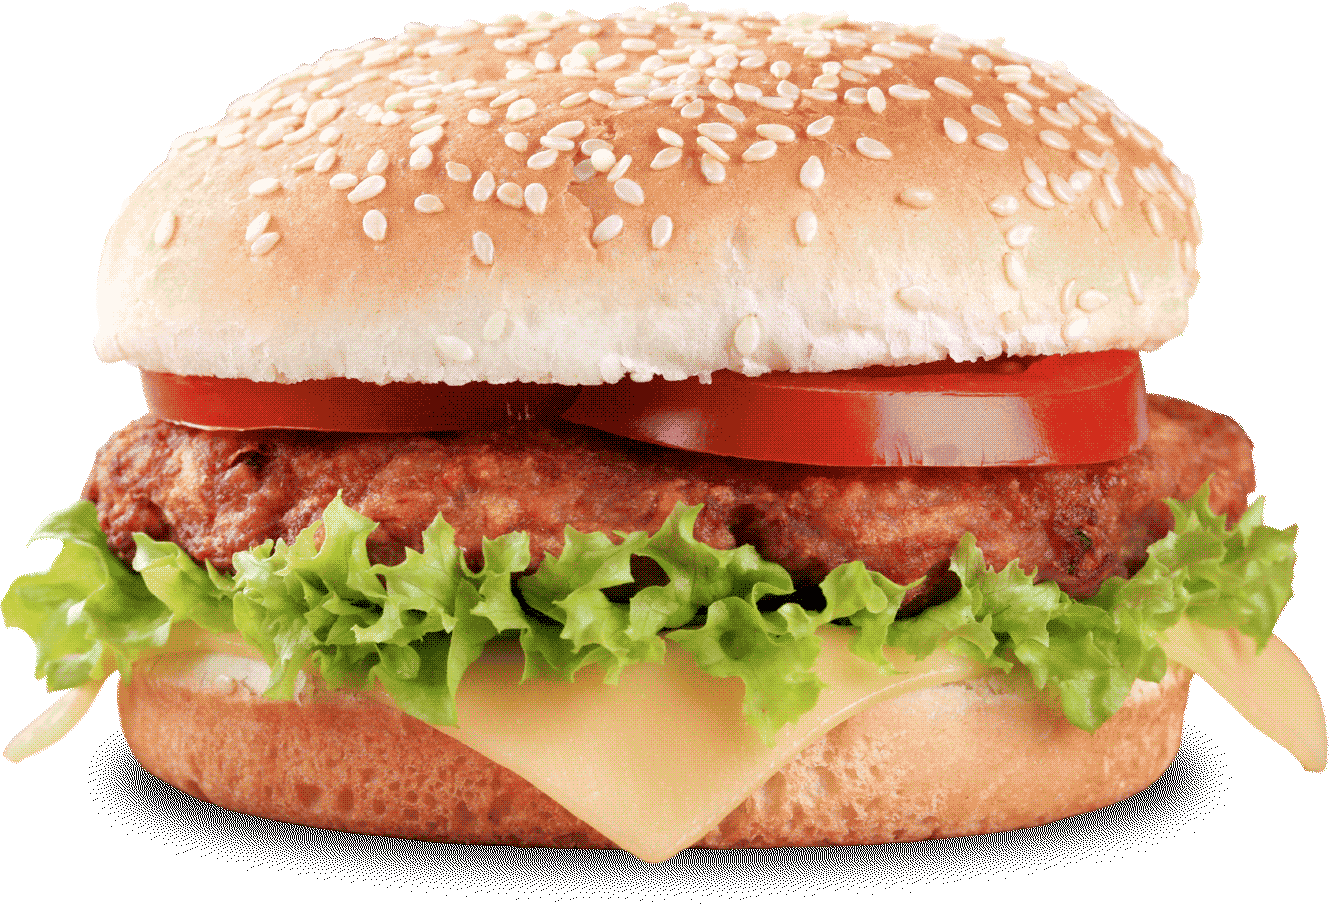 Burger and sandwich PNG images download pictures